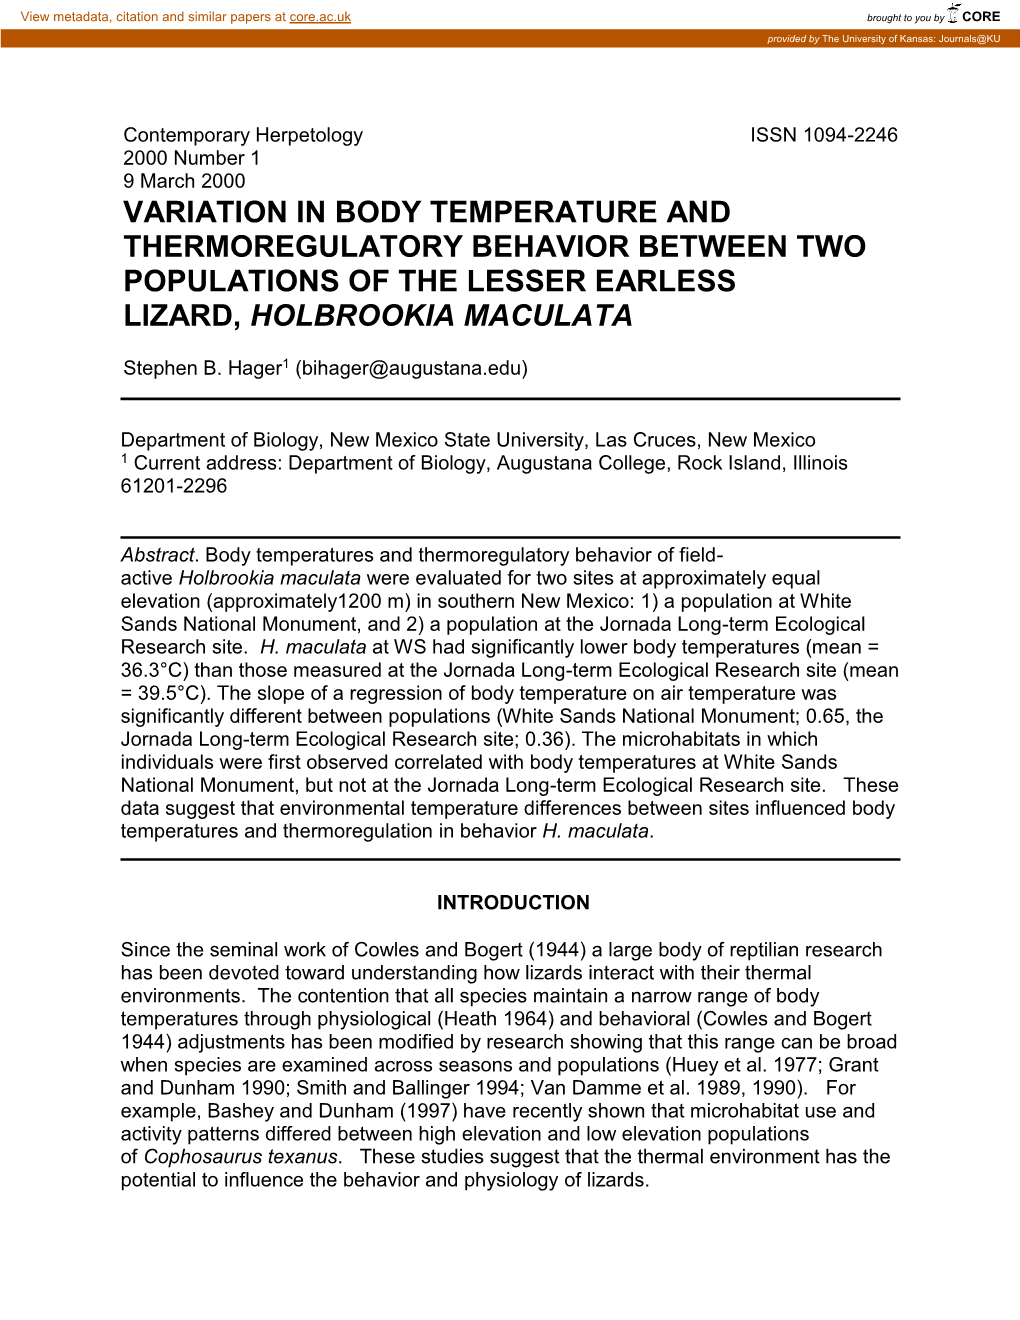 Variation in Body Temperature and Thermoregulatory Behavior Between Two Populations of the Lesser Earless Lizard, Holbrookia Maculata